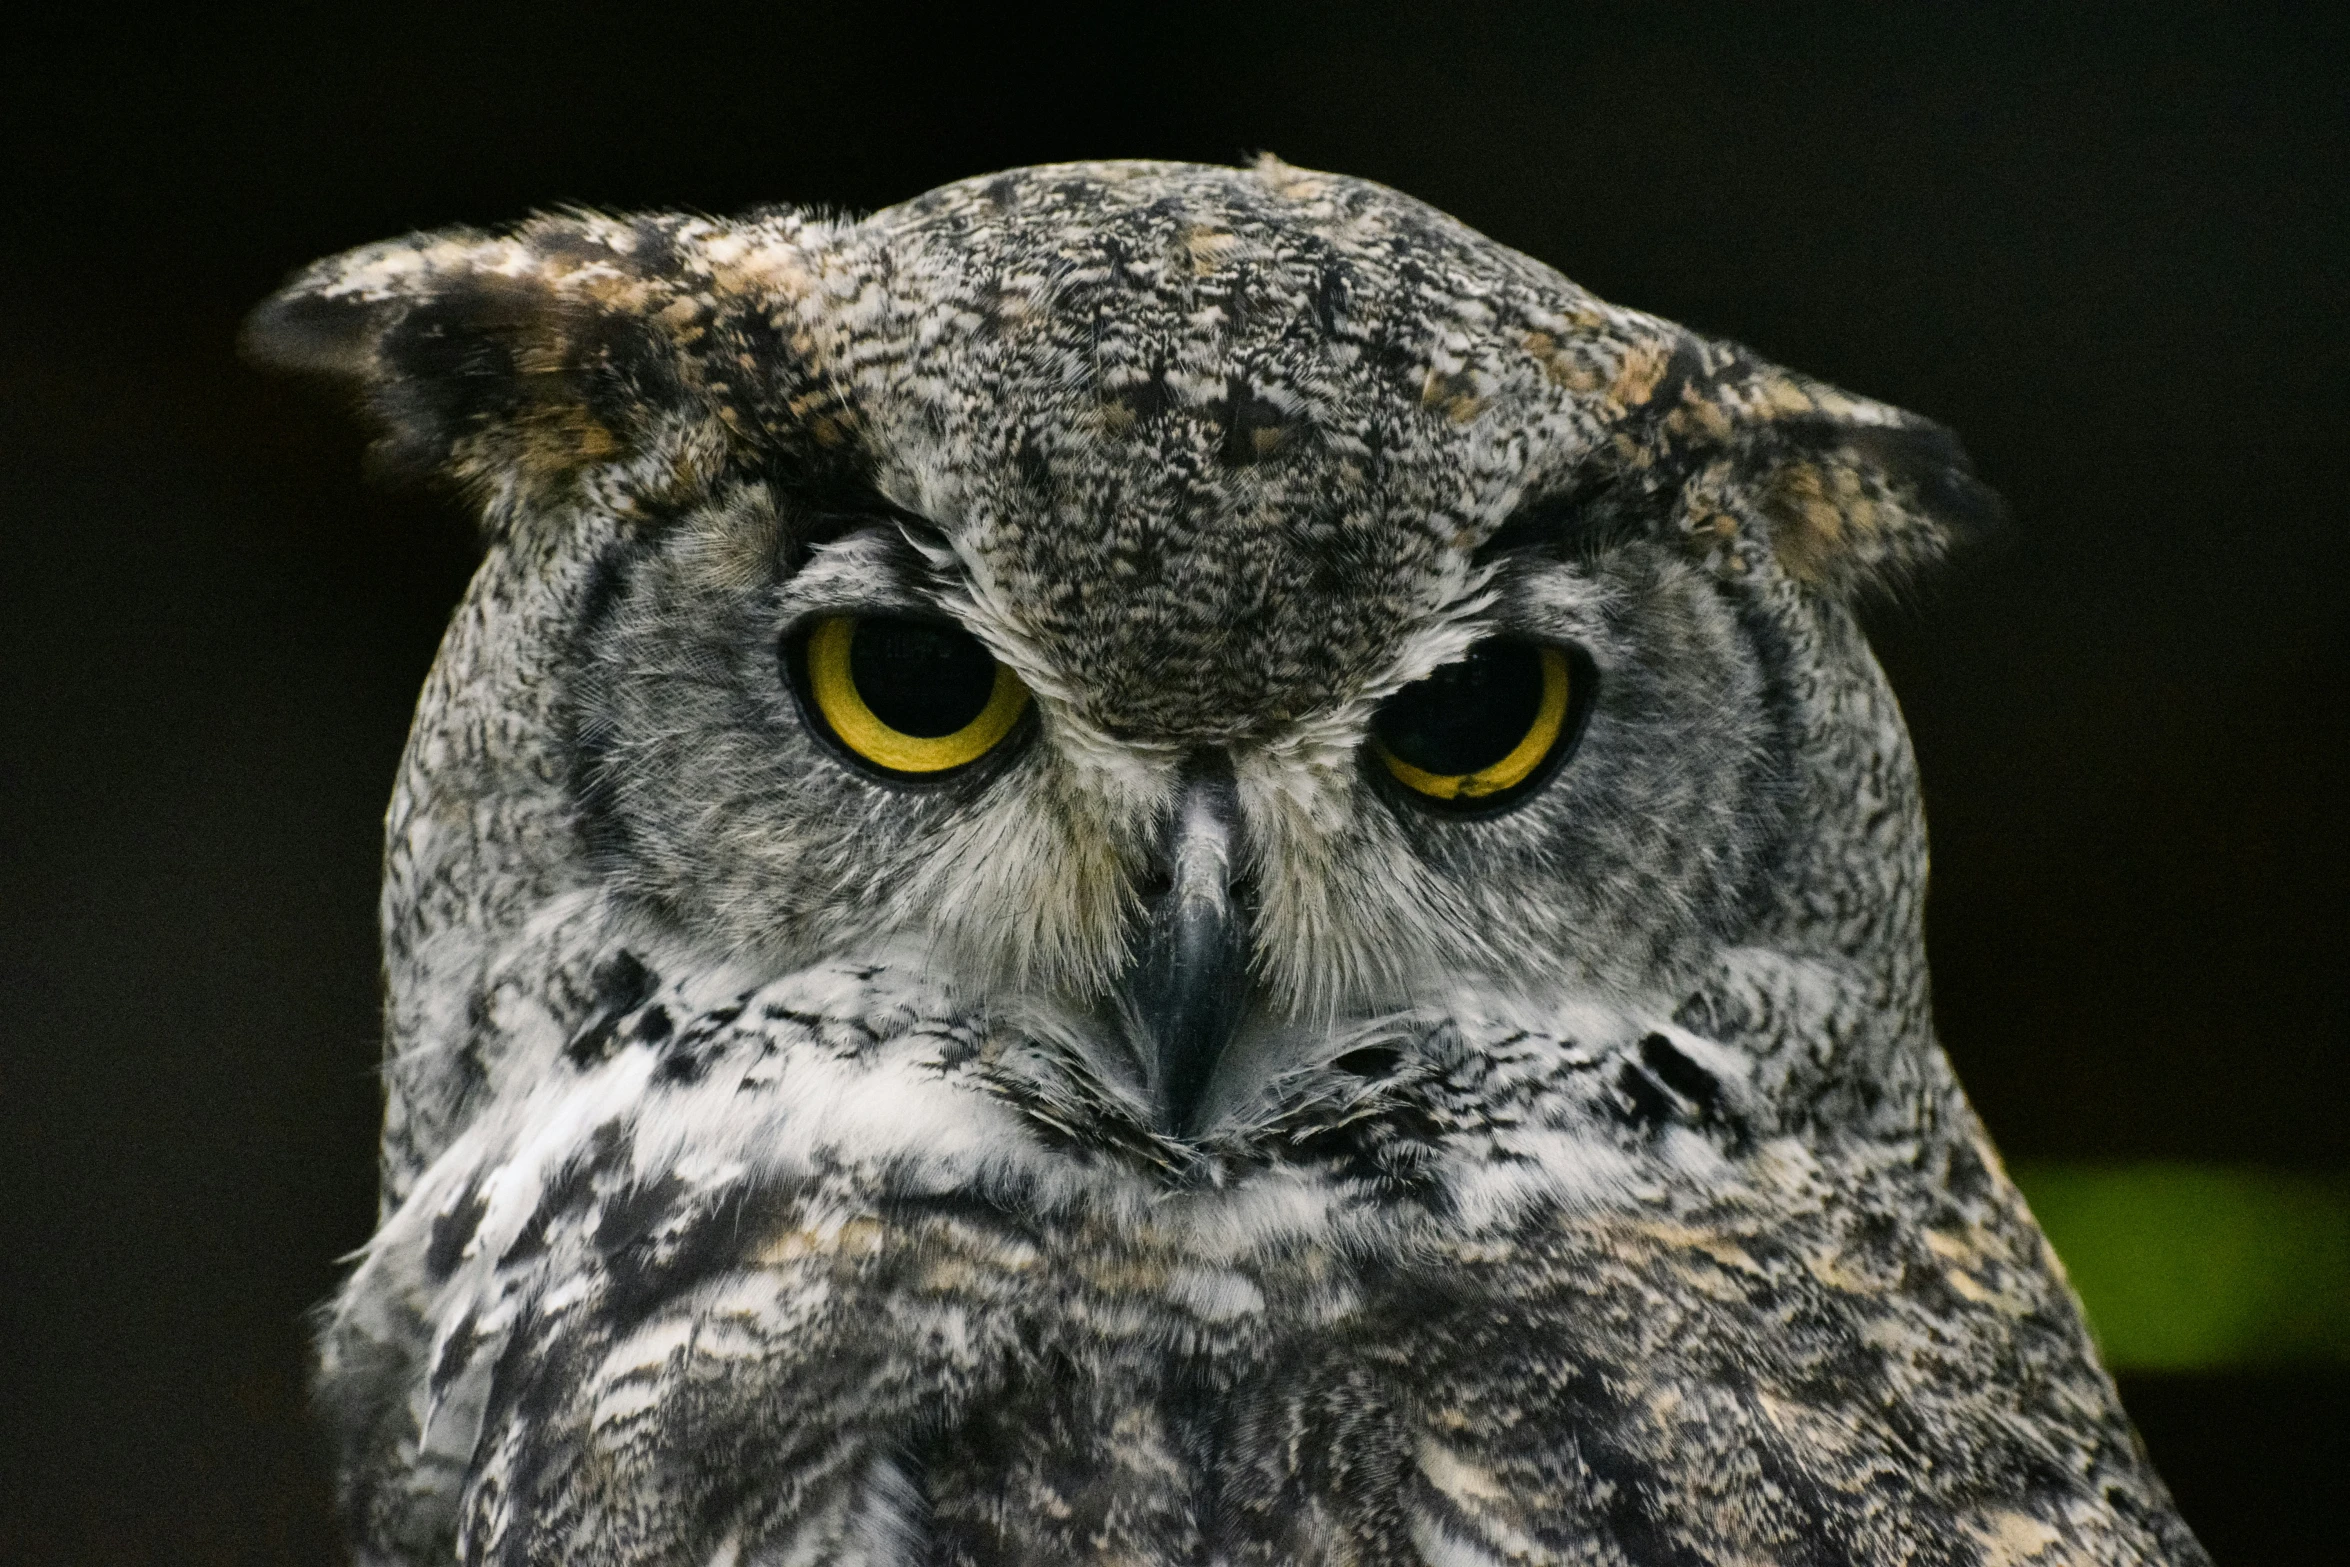 an owl has bright yellow eyes and is looking in the same direction